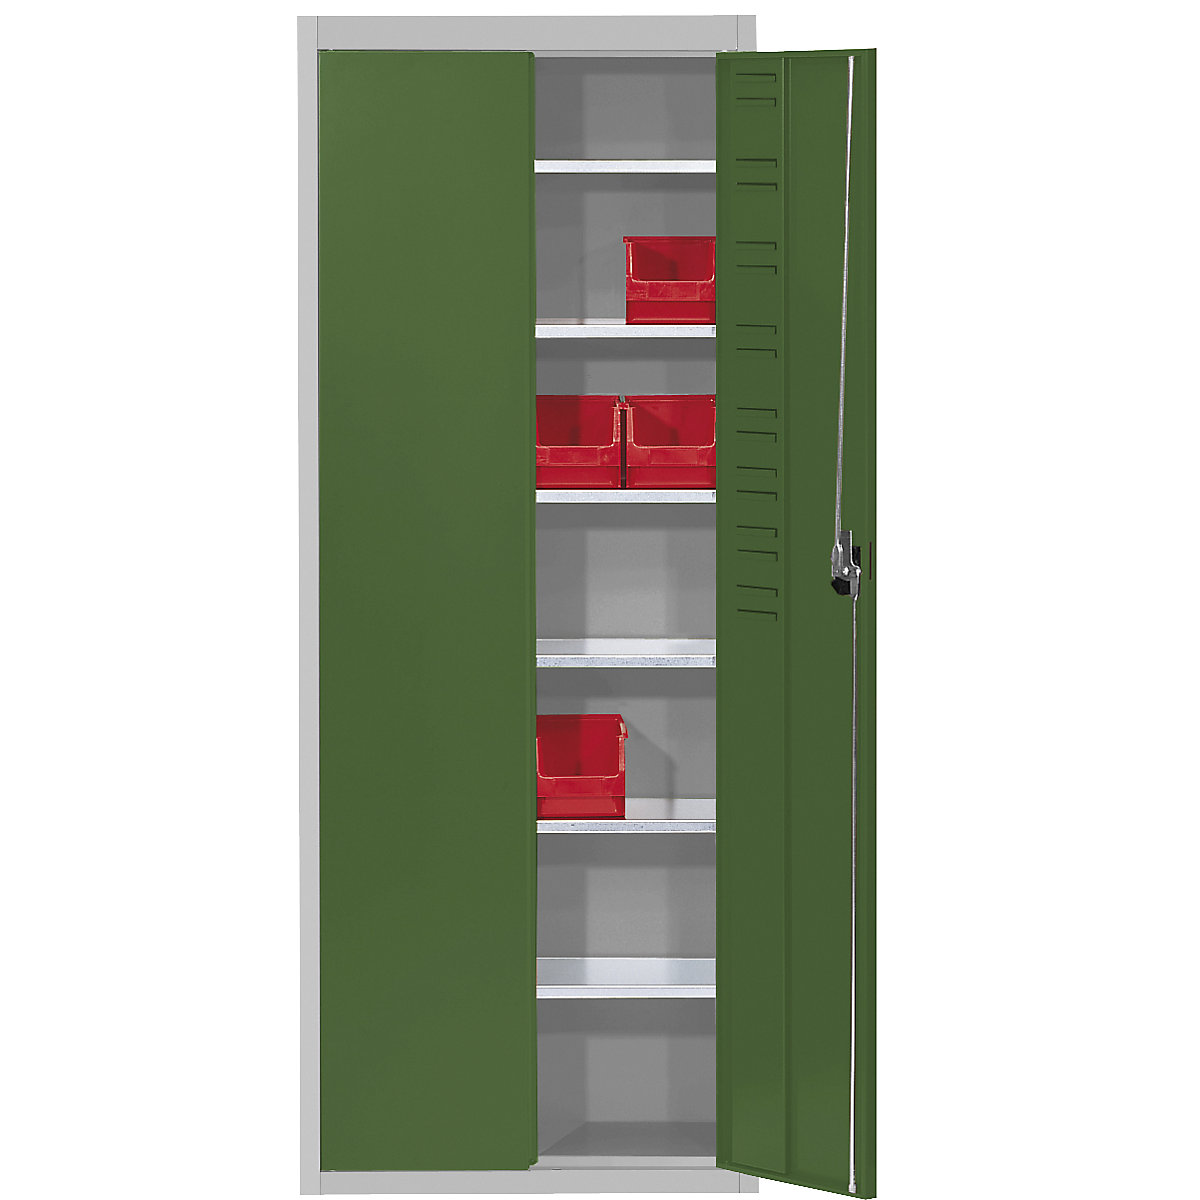 Storage cupboard, without open fronted storage bins - mauser